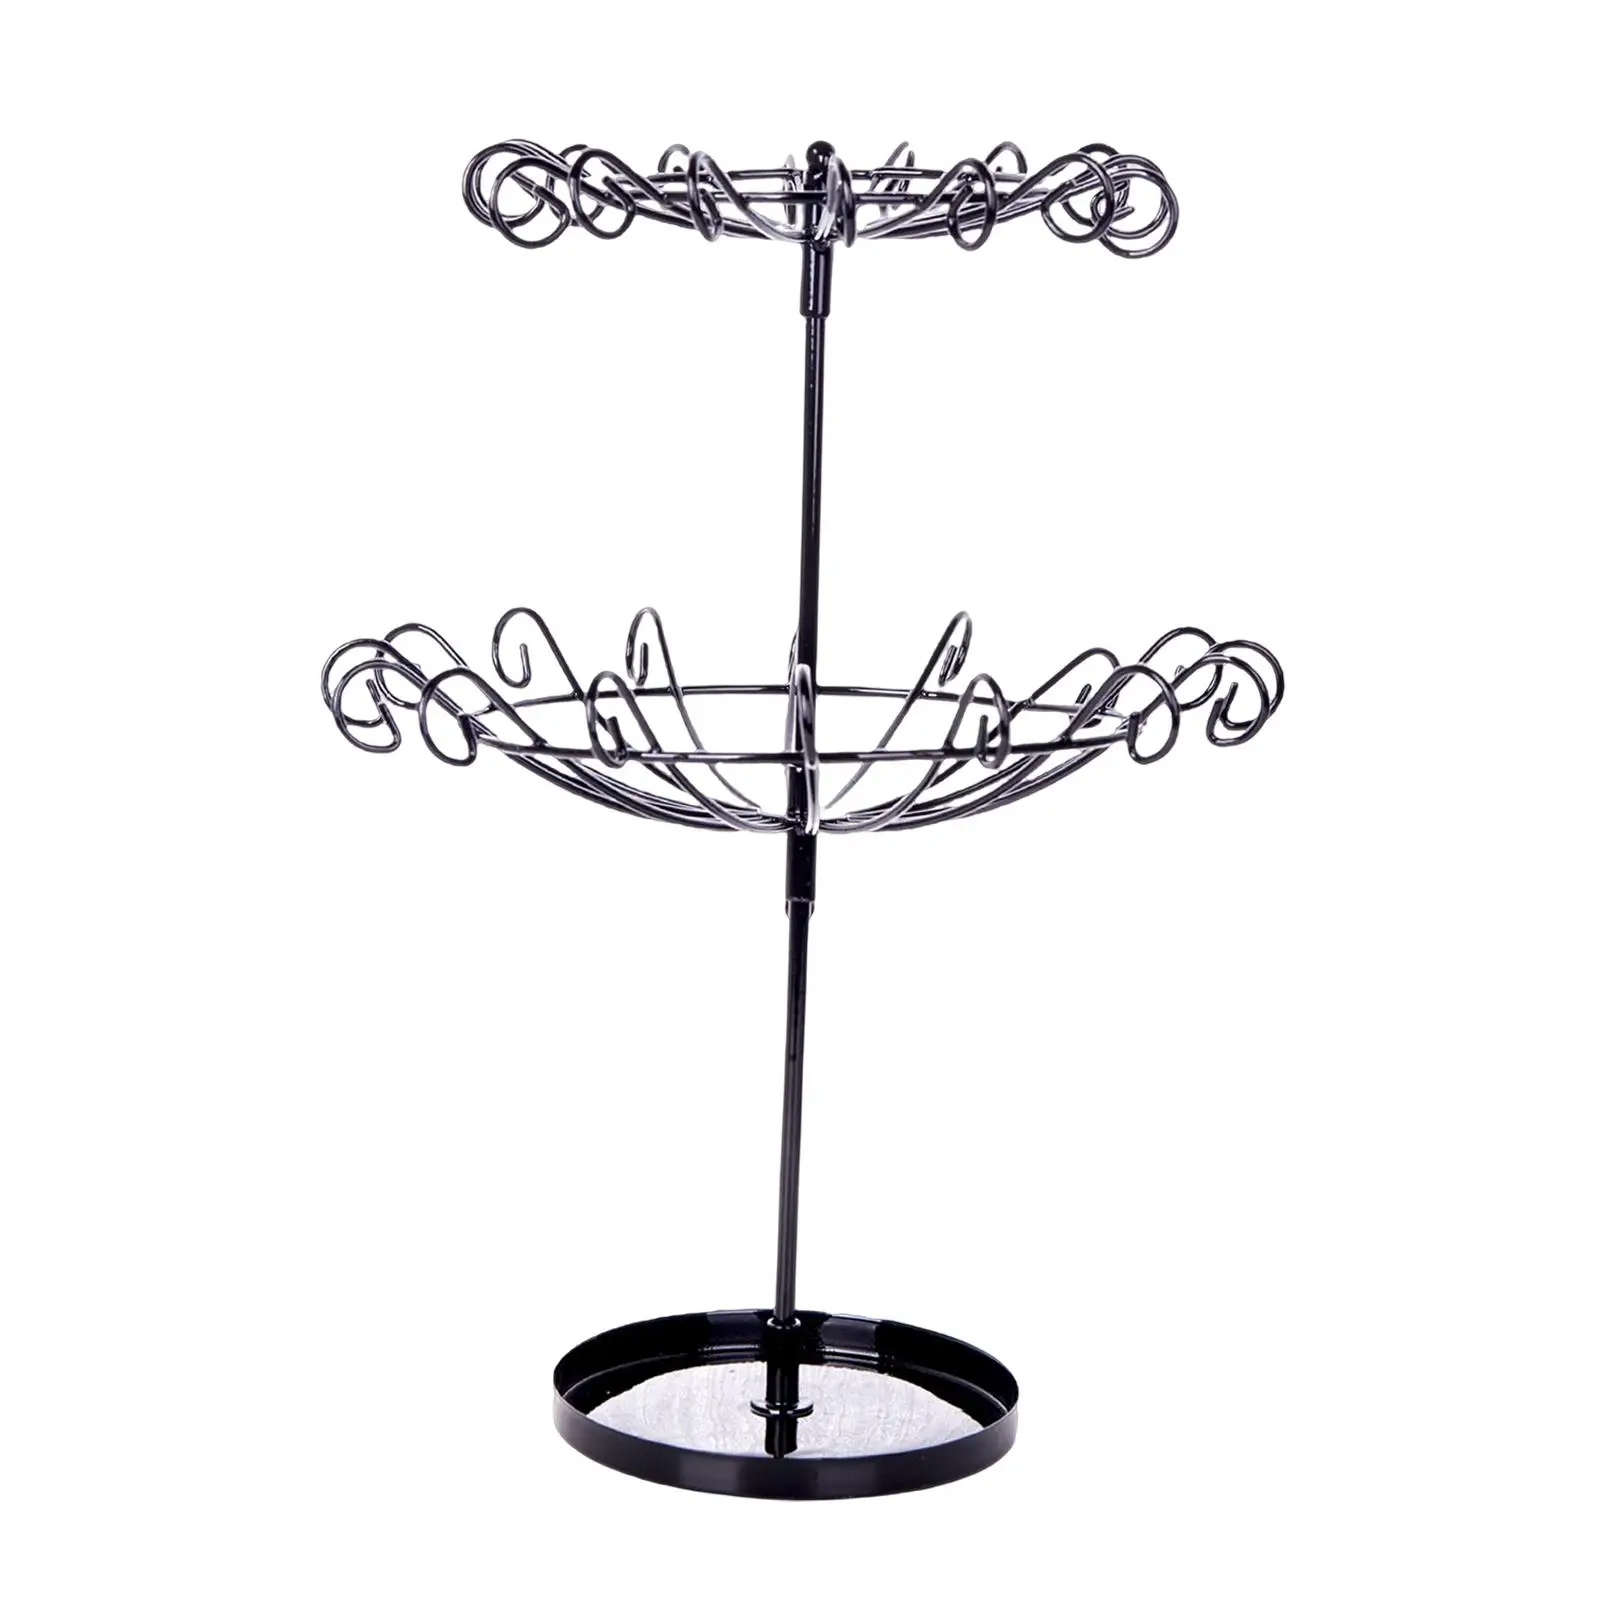 2 Tier Rotating Jewelry Stand Organizer with Tray jewelry Display Rack for Earrings Women Girls Necklaces Rings